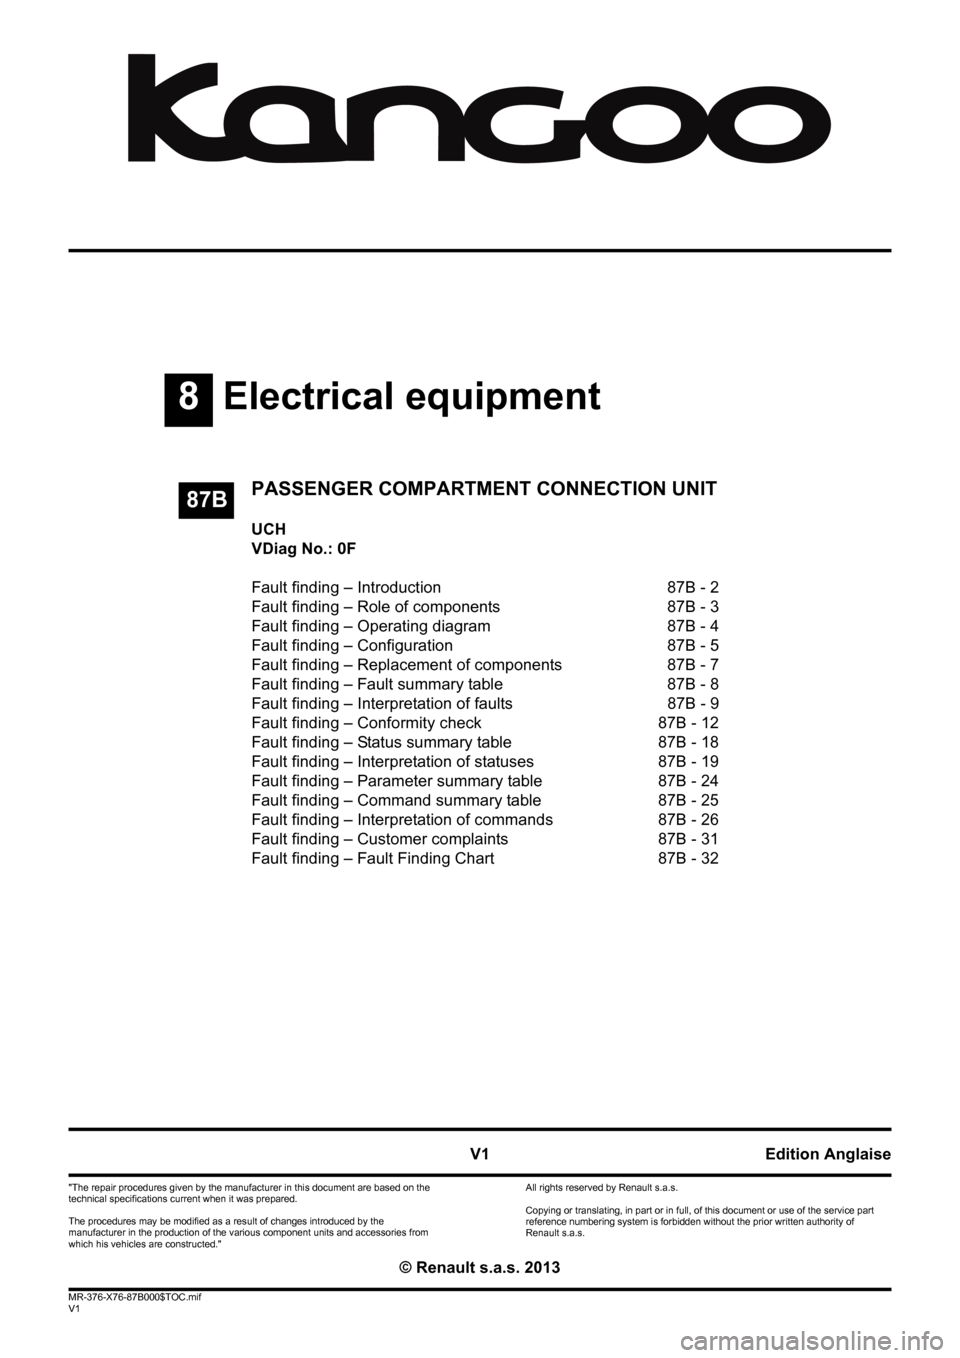 RENAULT KANGOO 2013 X61 / 2.G Passenger Comparment Connection Unit Workshop Manual 8Electrical equipment
V1 MR-376-X76-87B000$TOC.mif
V1
87B
"The repair procedures given by the manufacturer in this document are based on the 
technical specifications current when it was prepared.
The